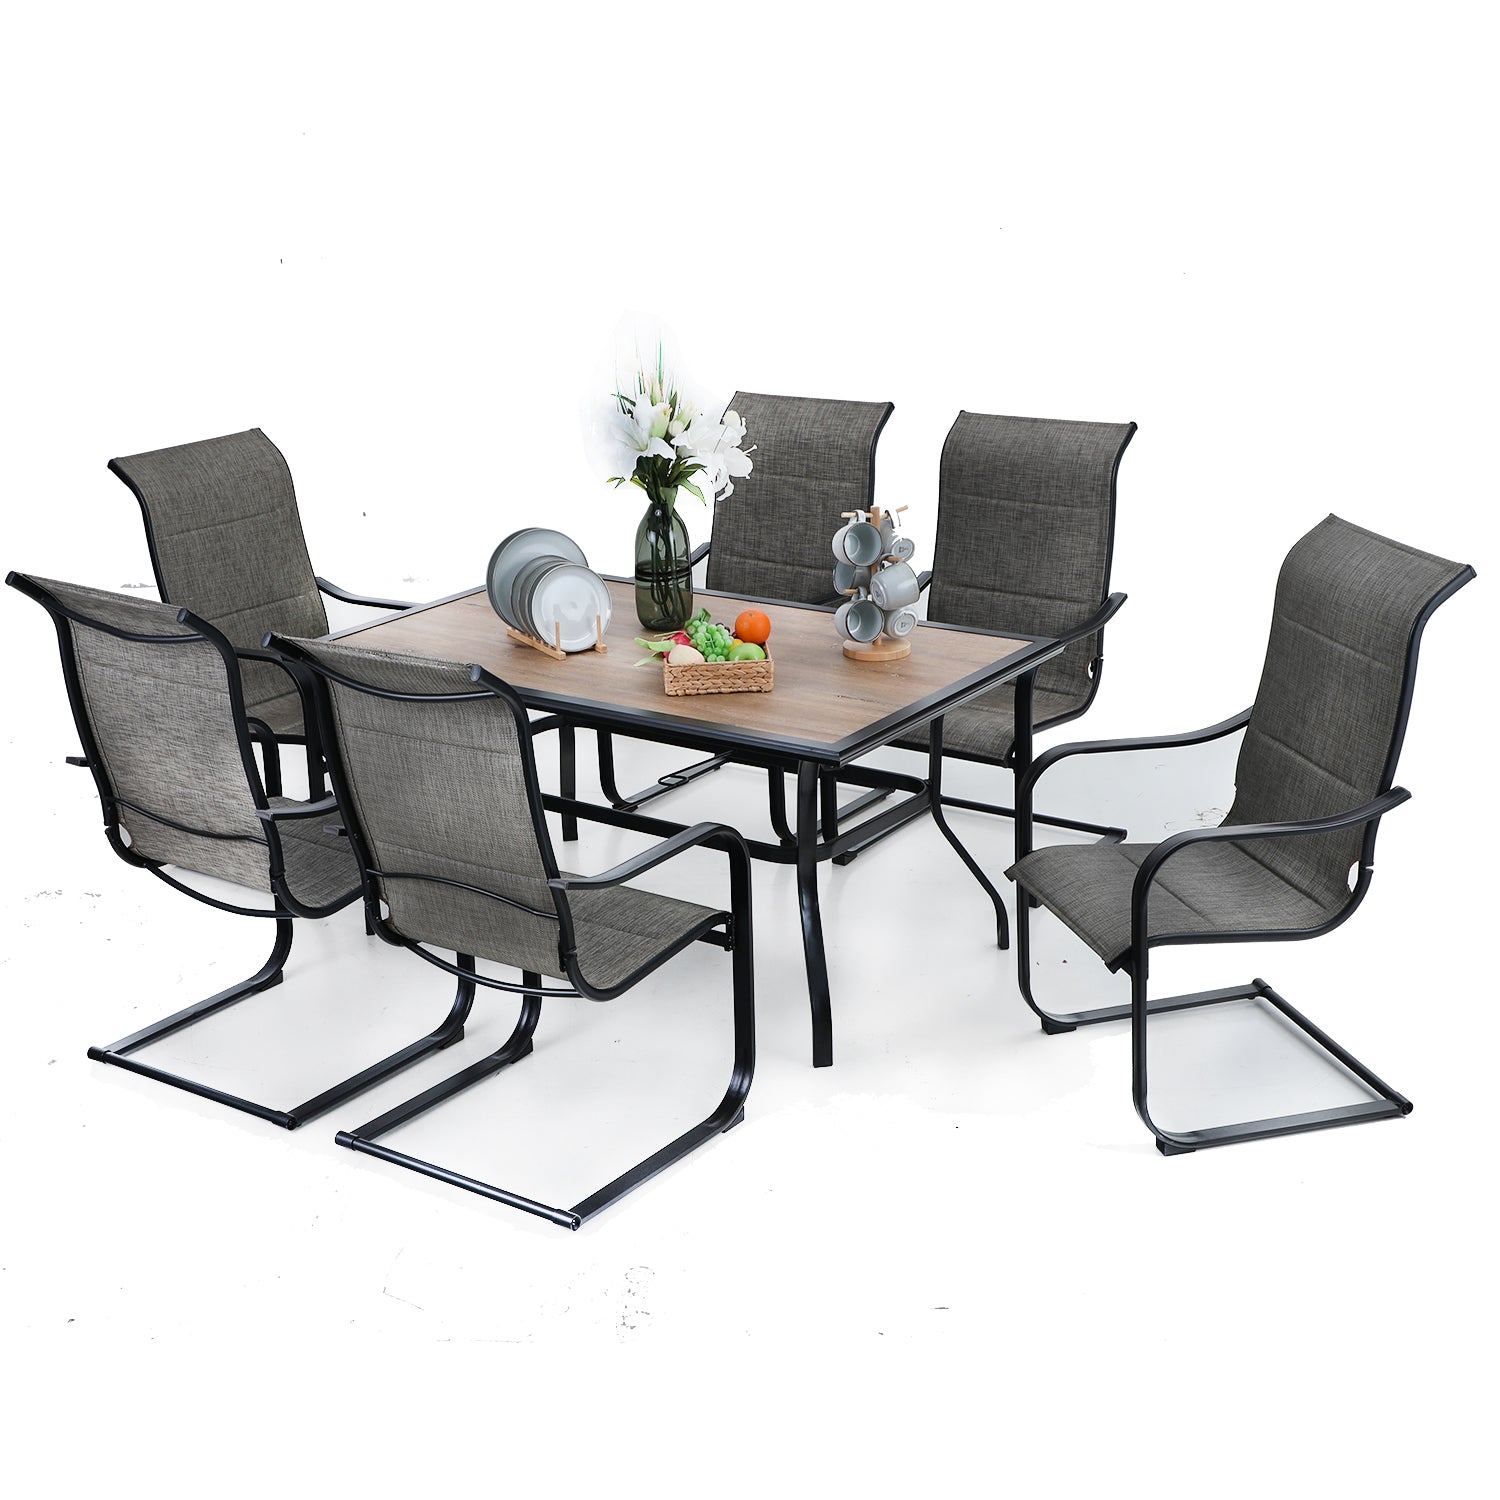 MFSTUDIO Wood-look Rectangle Table & 6 Textilene C-spring Chairs 7-Piece Outdoor Dining Set